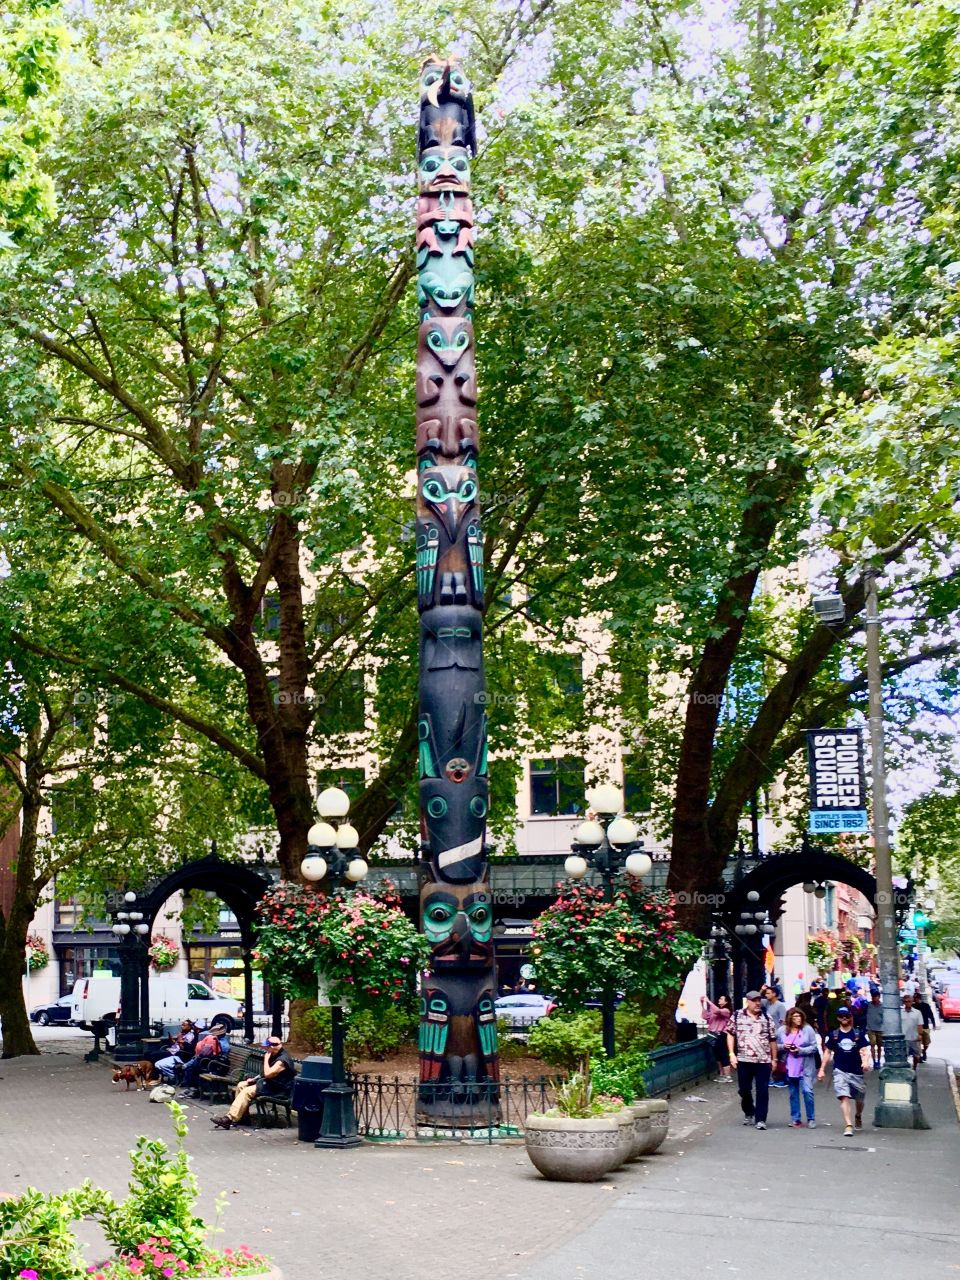 Totem in Pioneer Square, Seattle